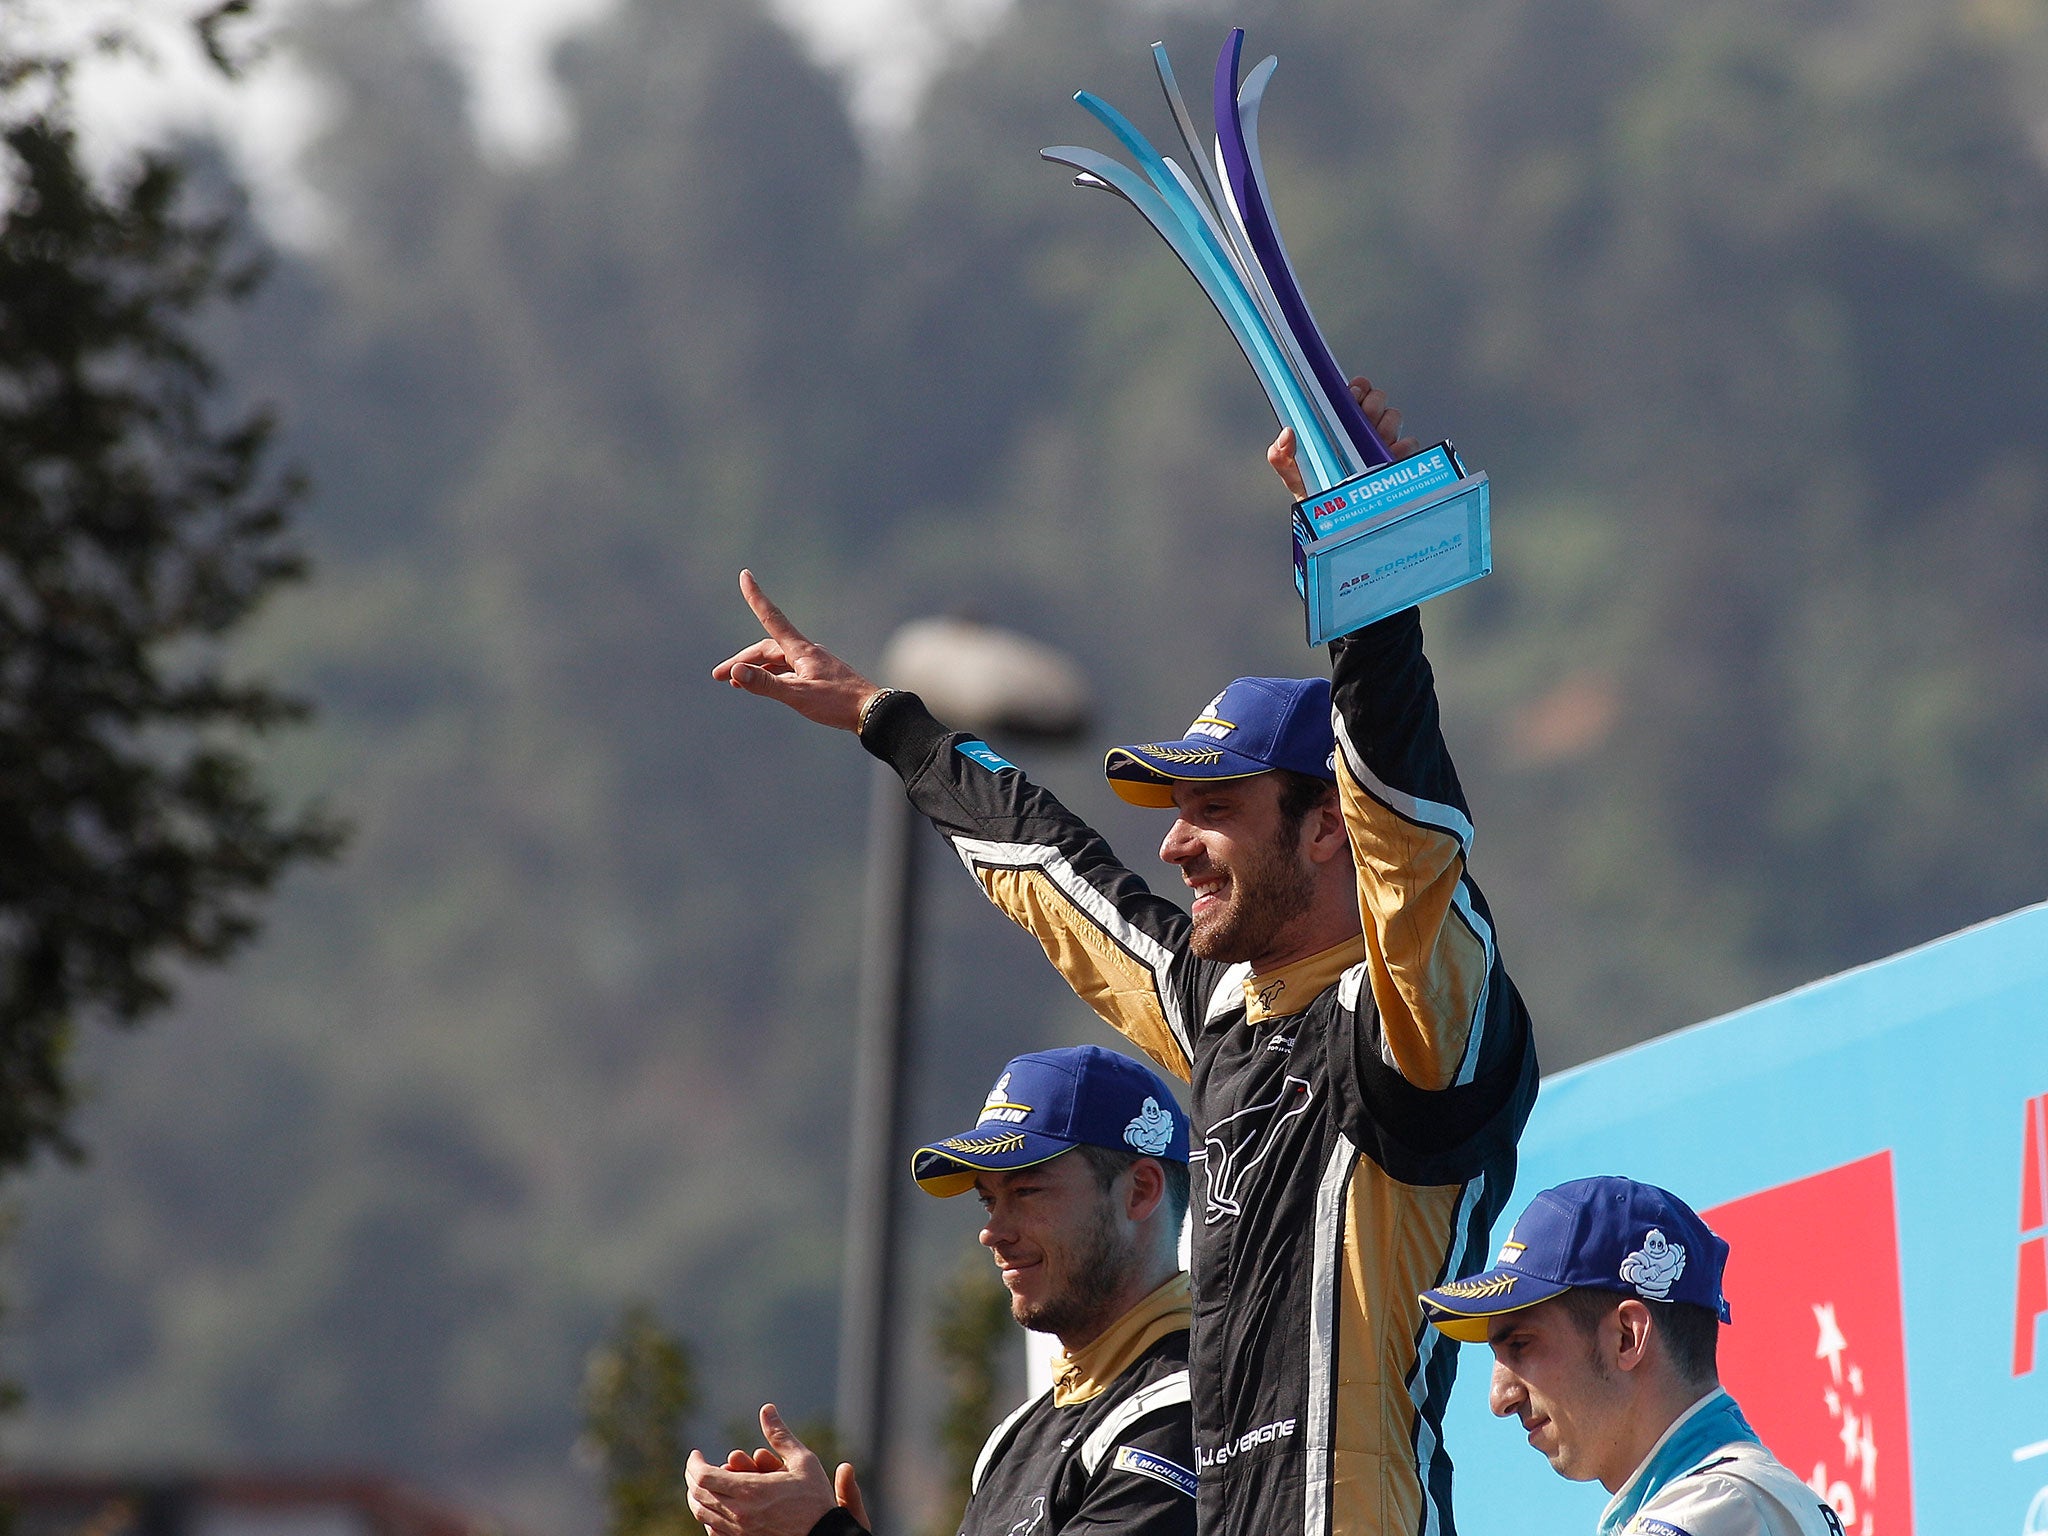 Jean-Eric Vergne on the podium after victory in Santiago